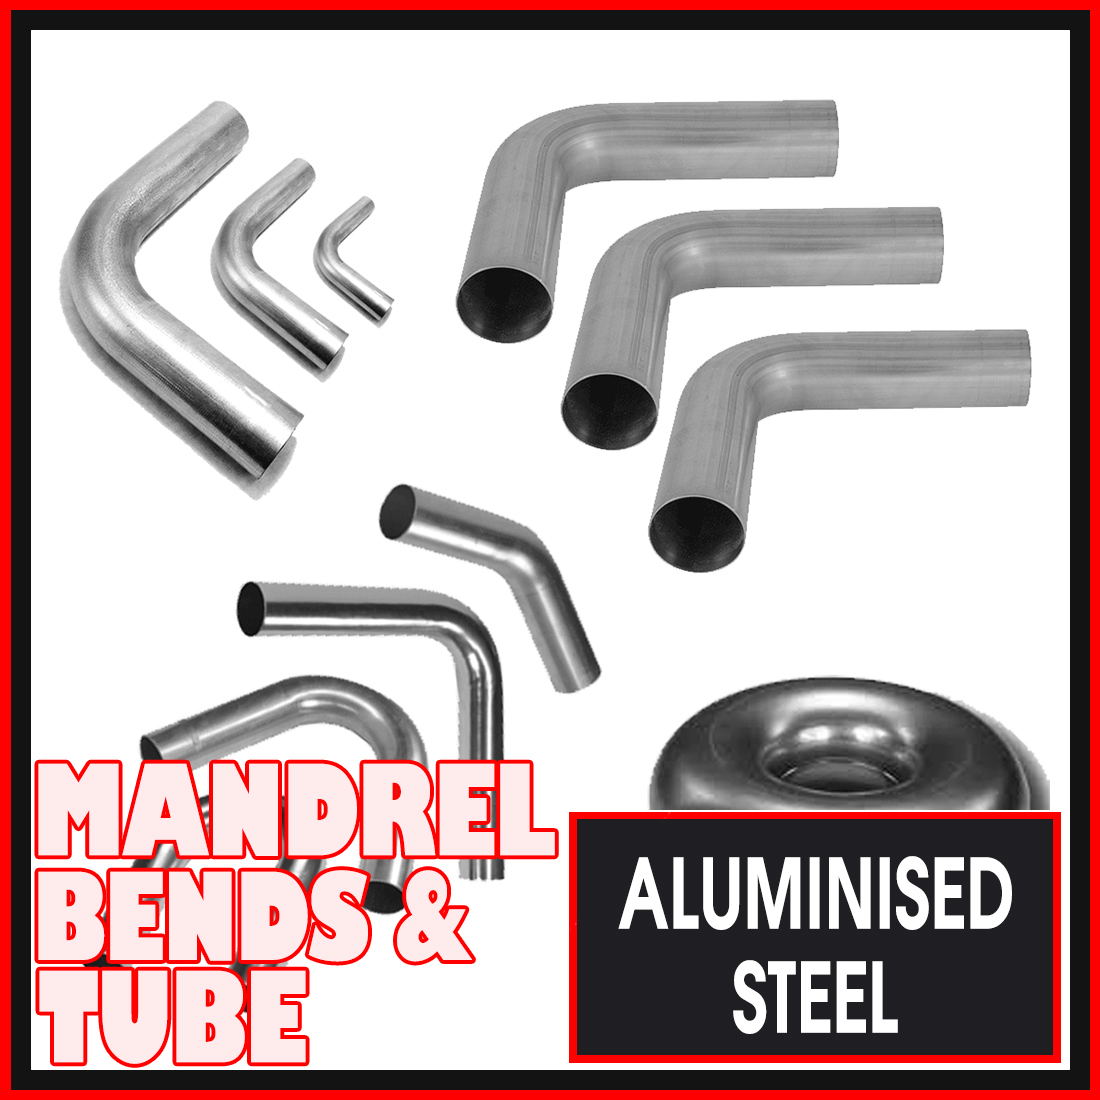 3 1/2" Aluminised Mild Steel Mandrel Bends and Exhaust Pipe image